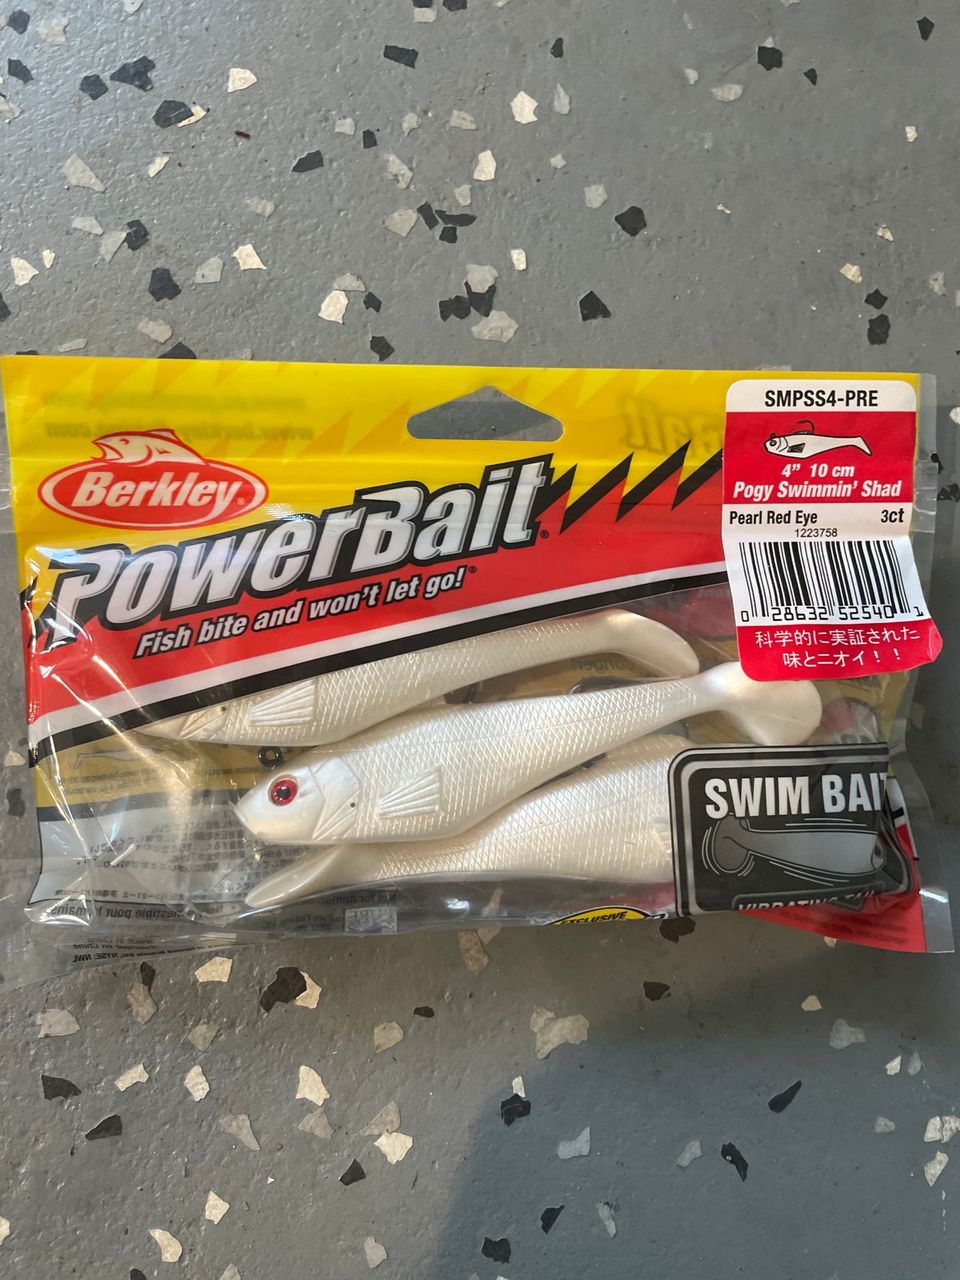 Anyone have experience with this bait when fishing for bass? And is this bait good for spring bass fishing?